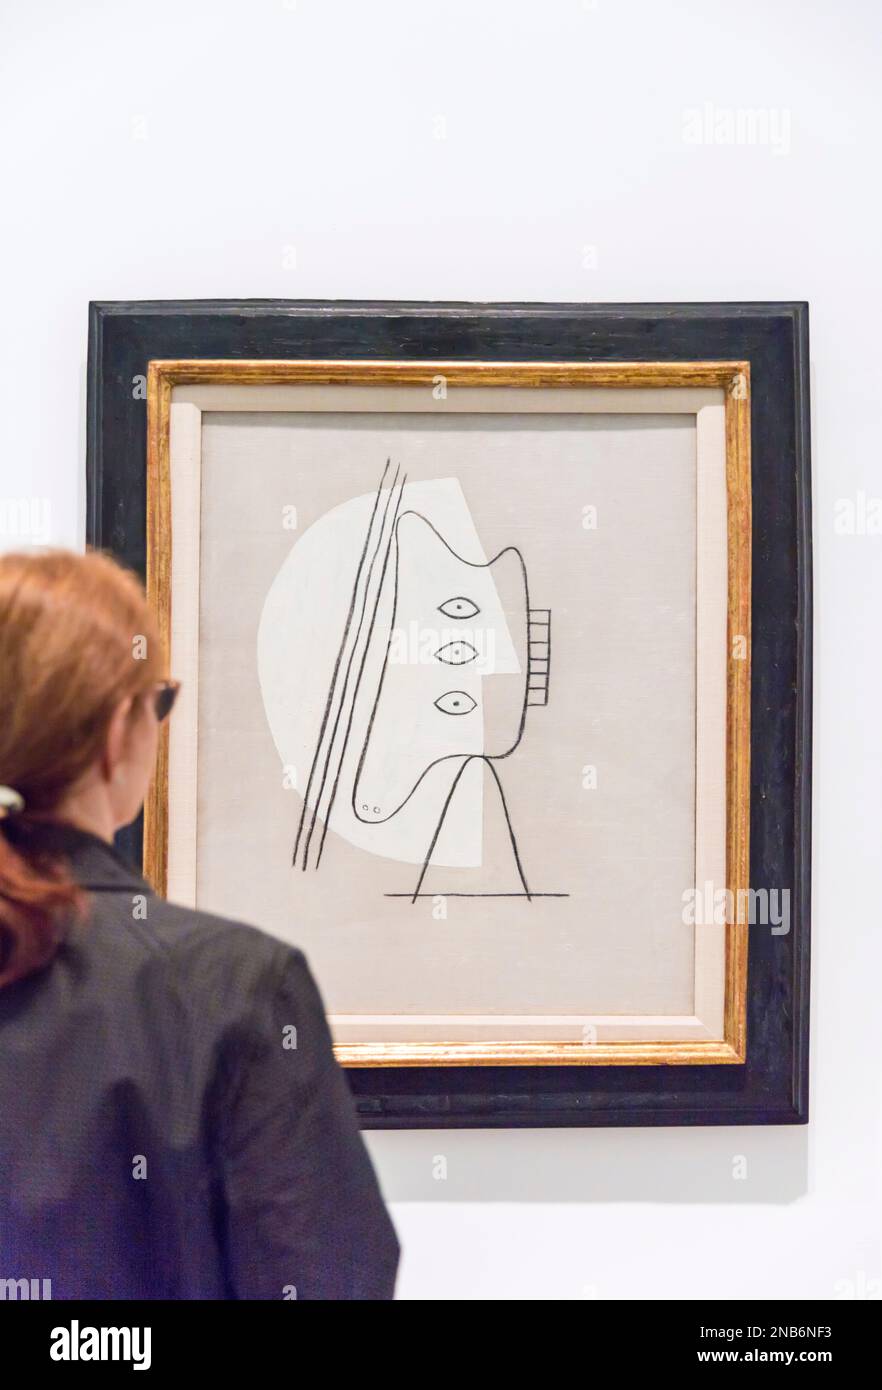 A woman looks at a Pablo Picasso painting entitled Figure (1928) in the Reina Sofia Museum in Madrid, Spain with copy space Stock Photo